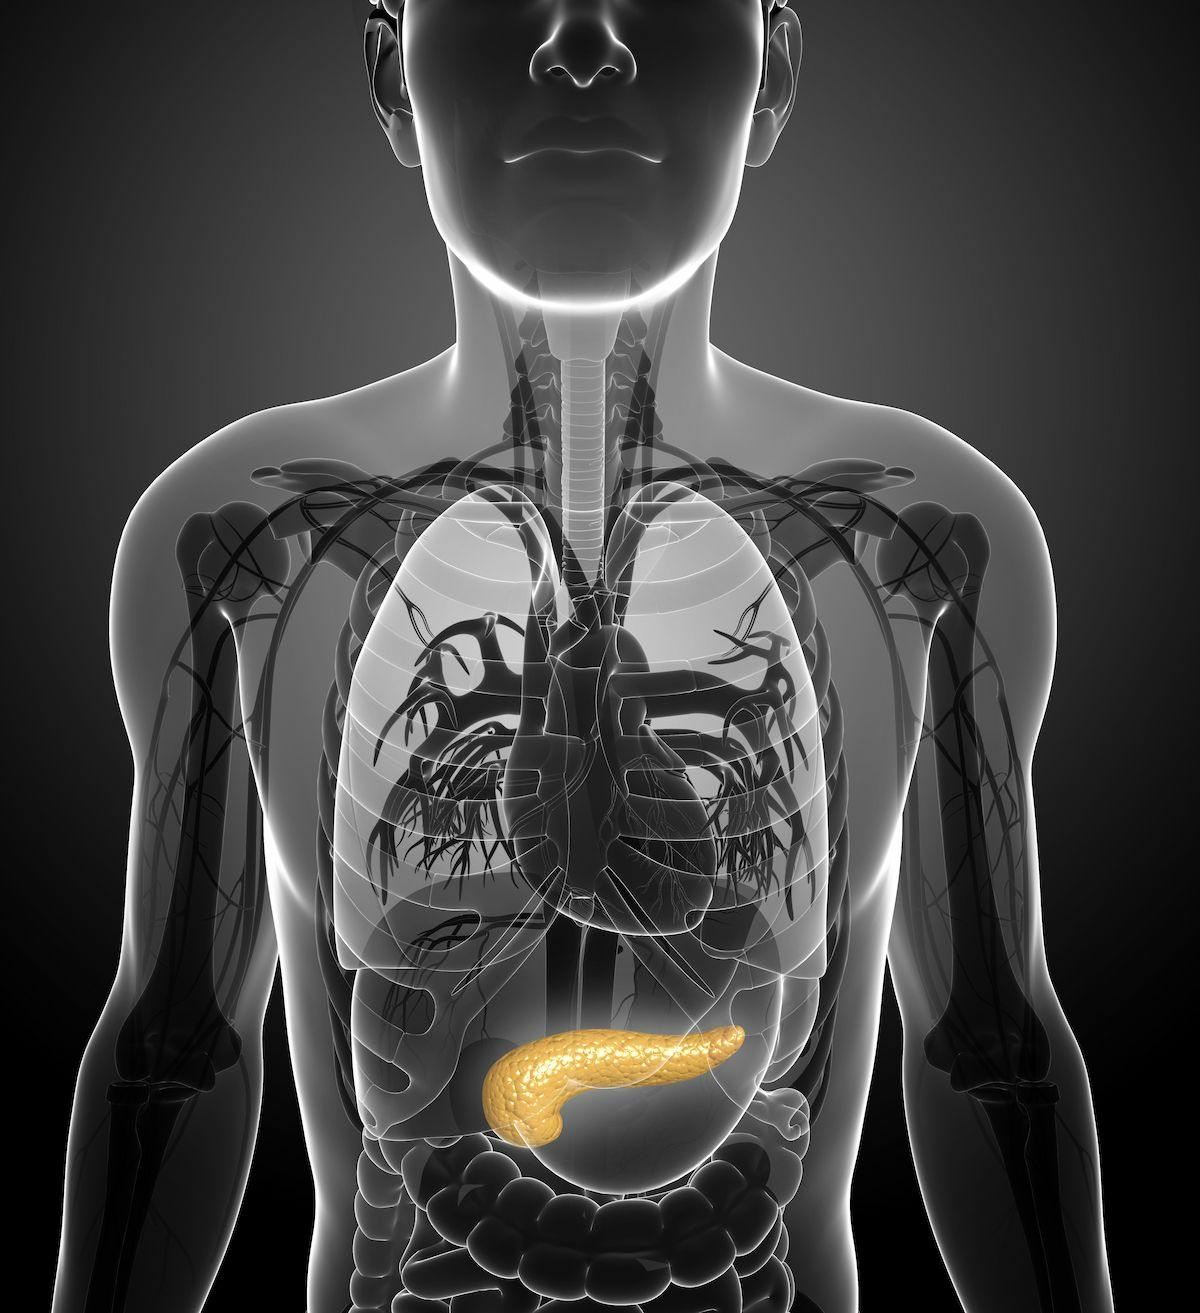 Investigators are currently evaluating treatment with IMM-1-104 in pancreatic cancer and other disease types associated with the RAS pathway as part of a phase 1/2a study.